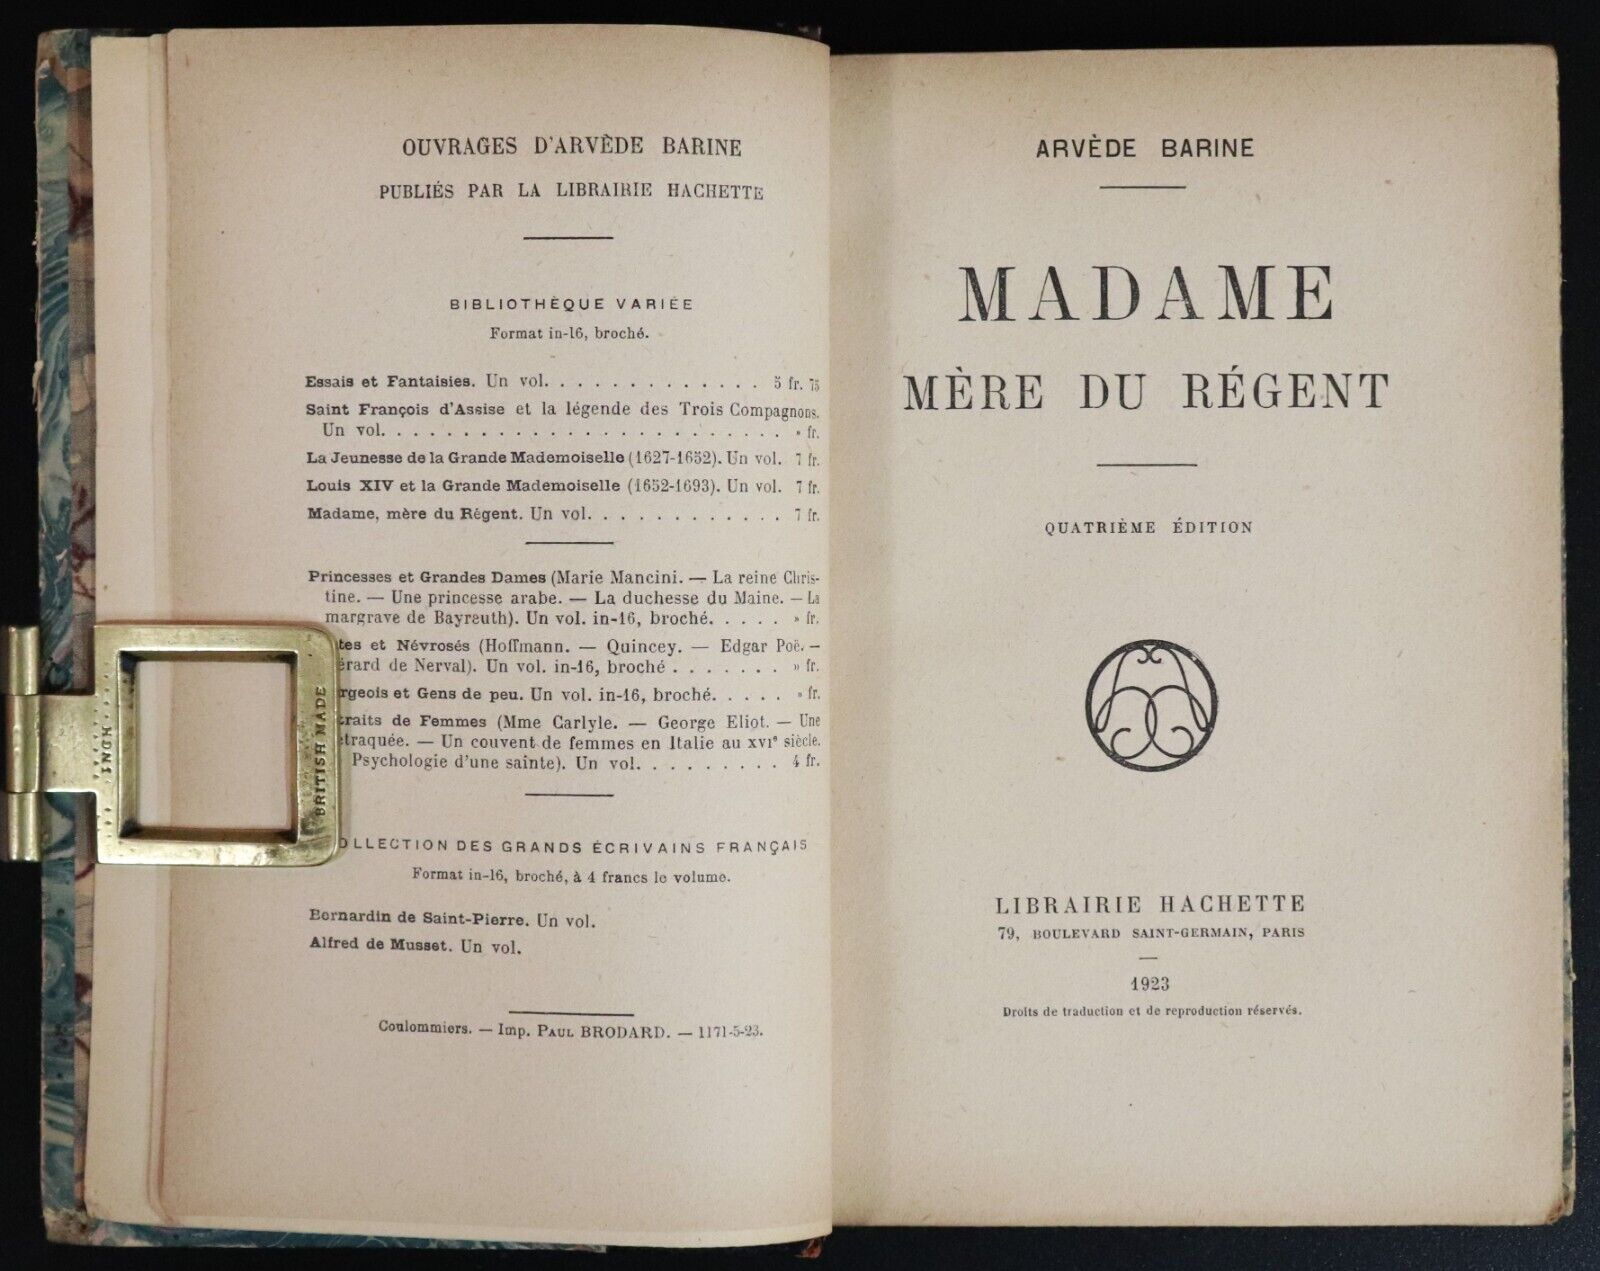 1923 Madame Mere Du Regent by Arvede Barine French History Book Fine Binding - 0